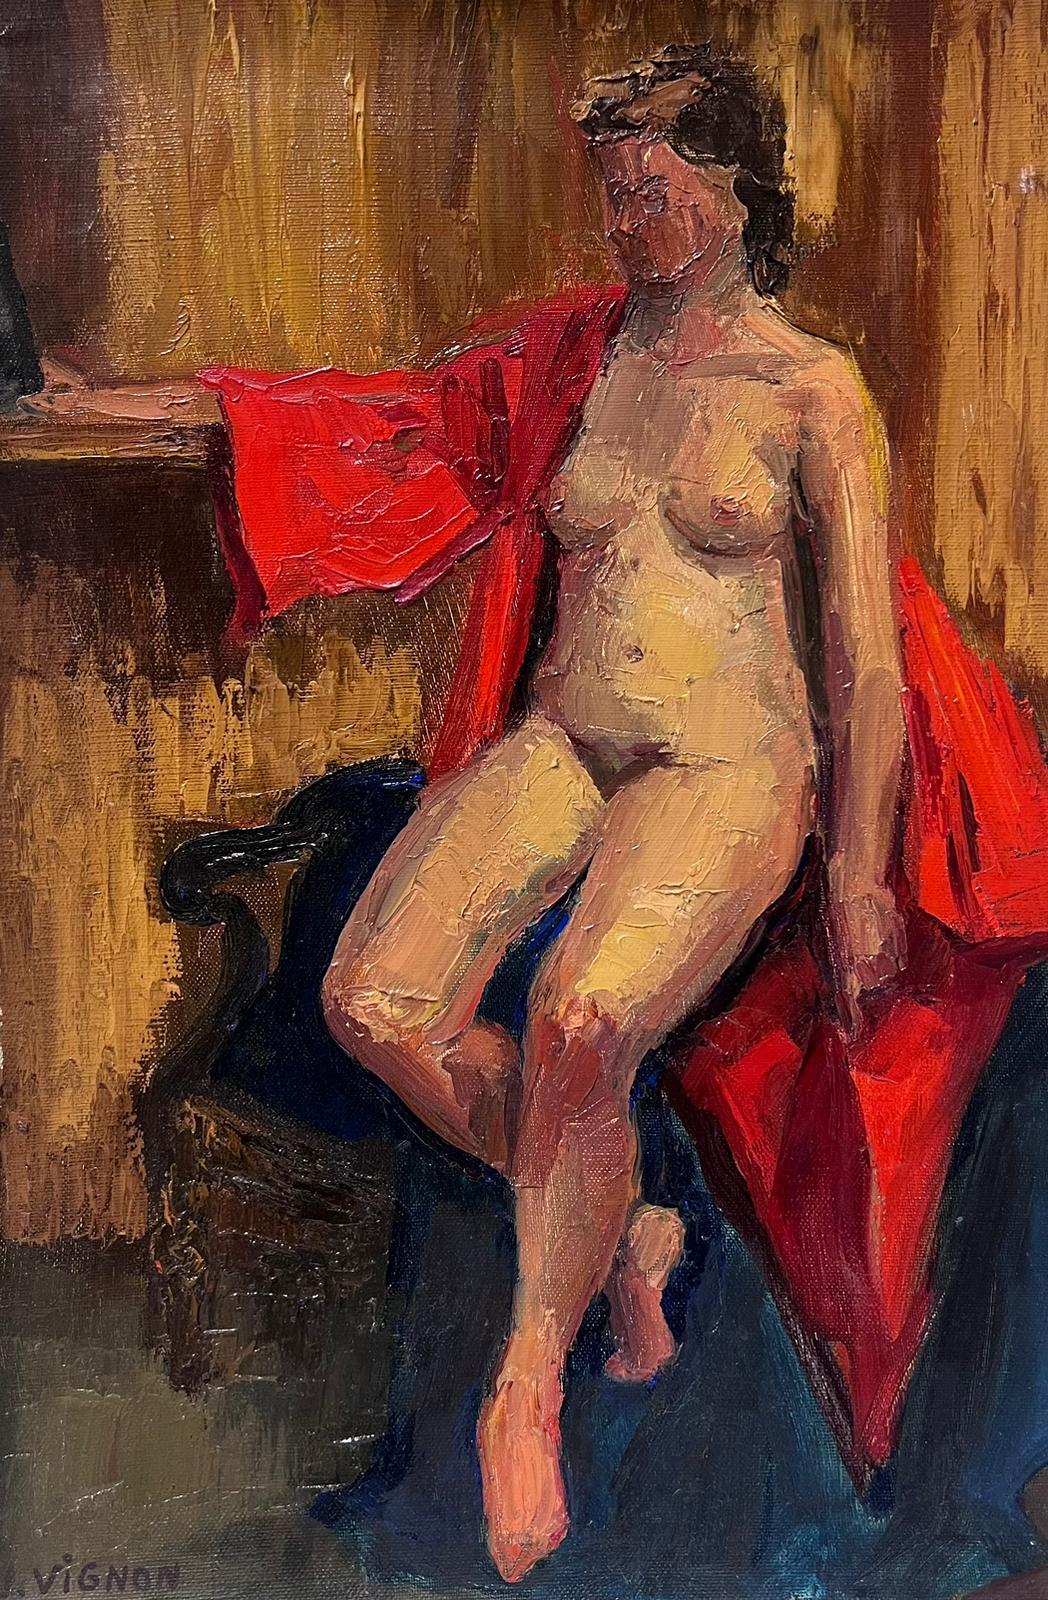 Josine Vignon Portrait Painting - 1950s French Post Impressionist Nude Lady Artists Studio In Red Gown